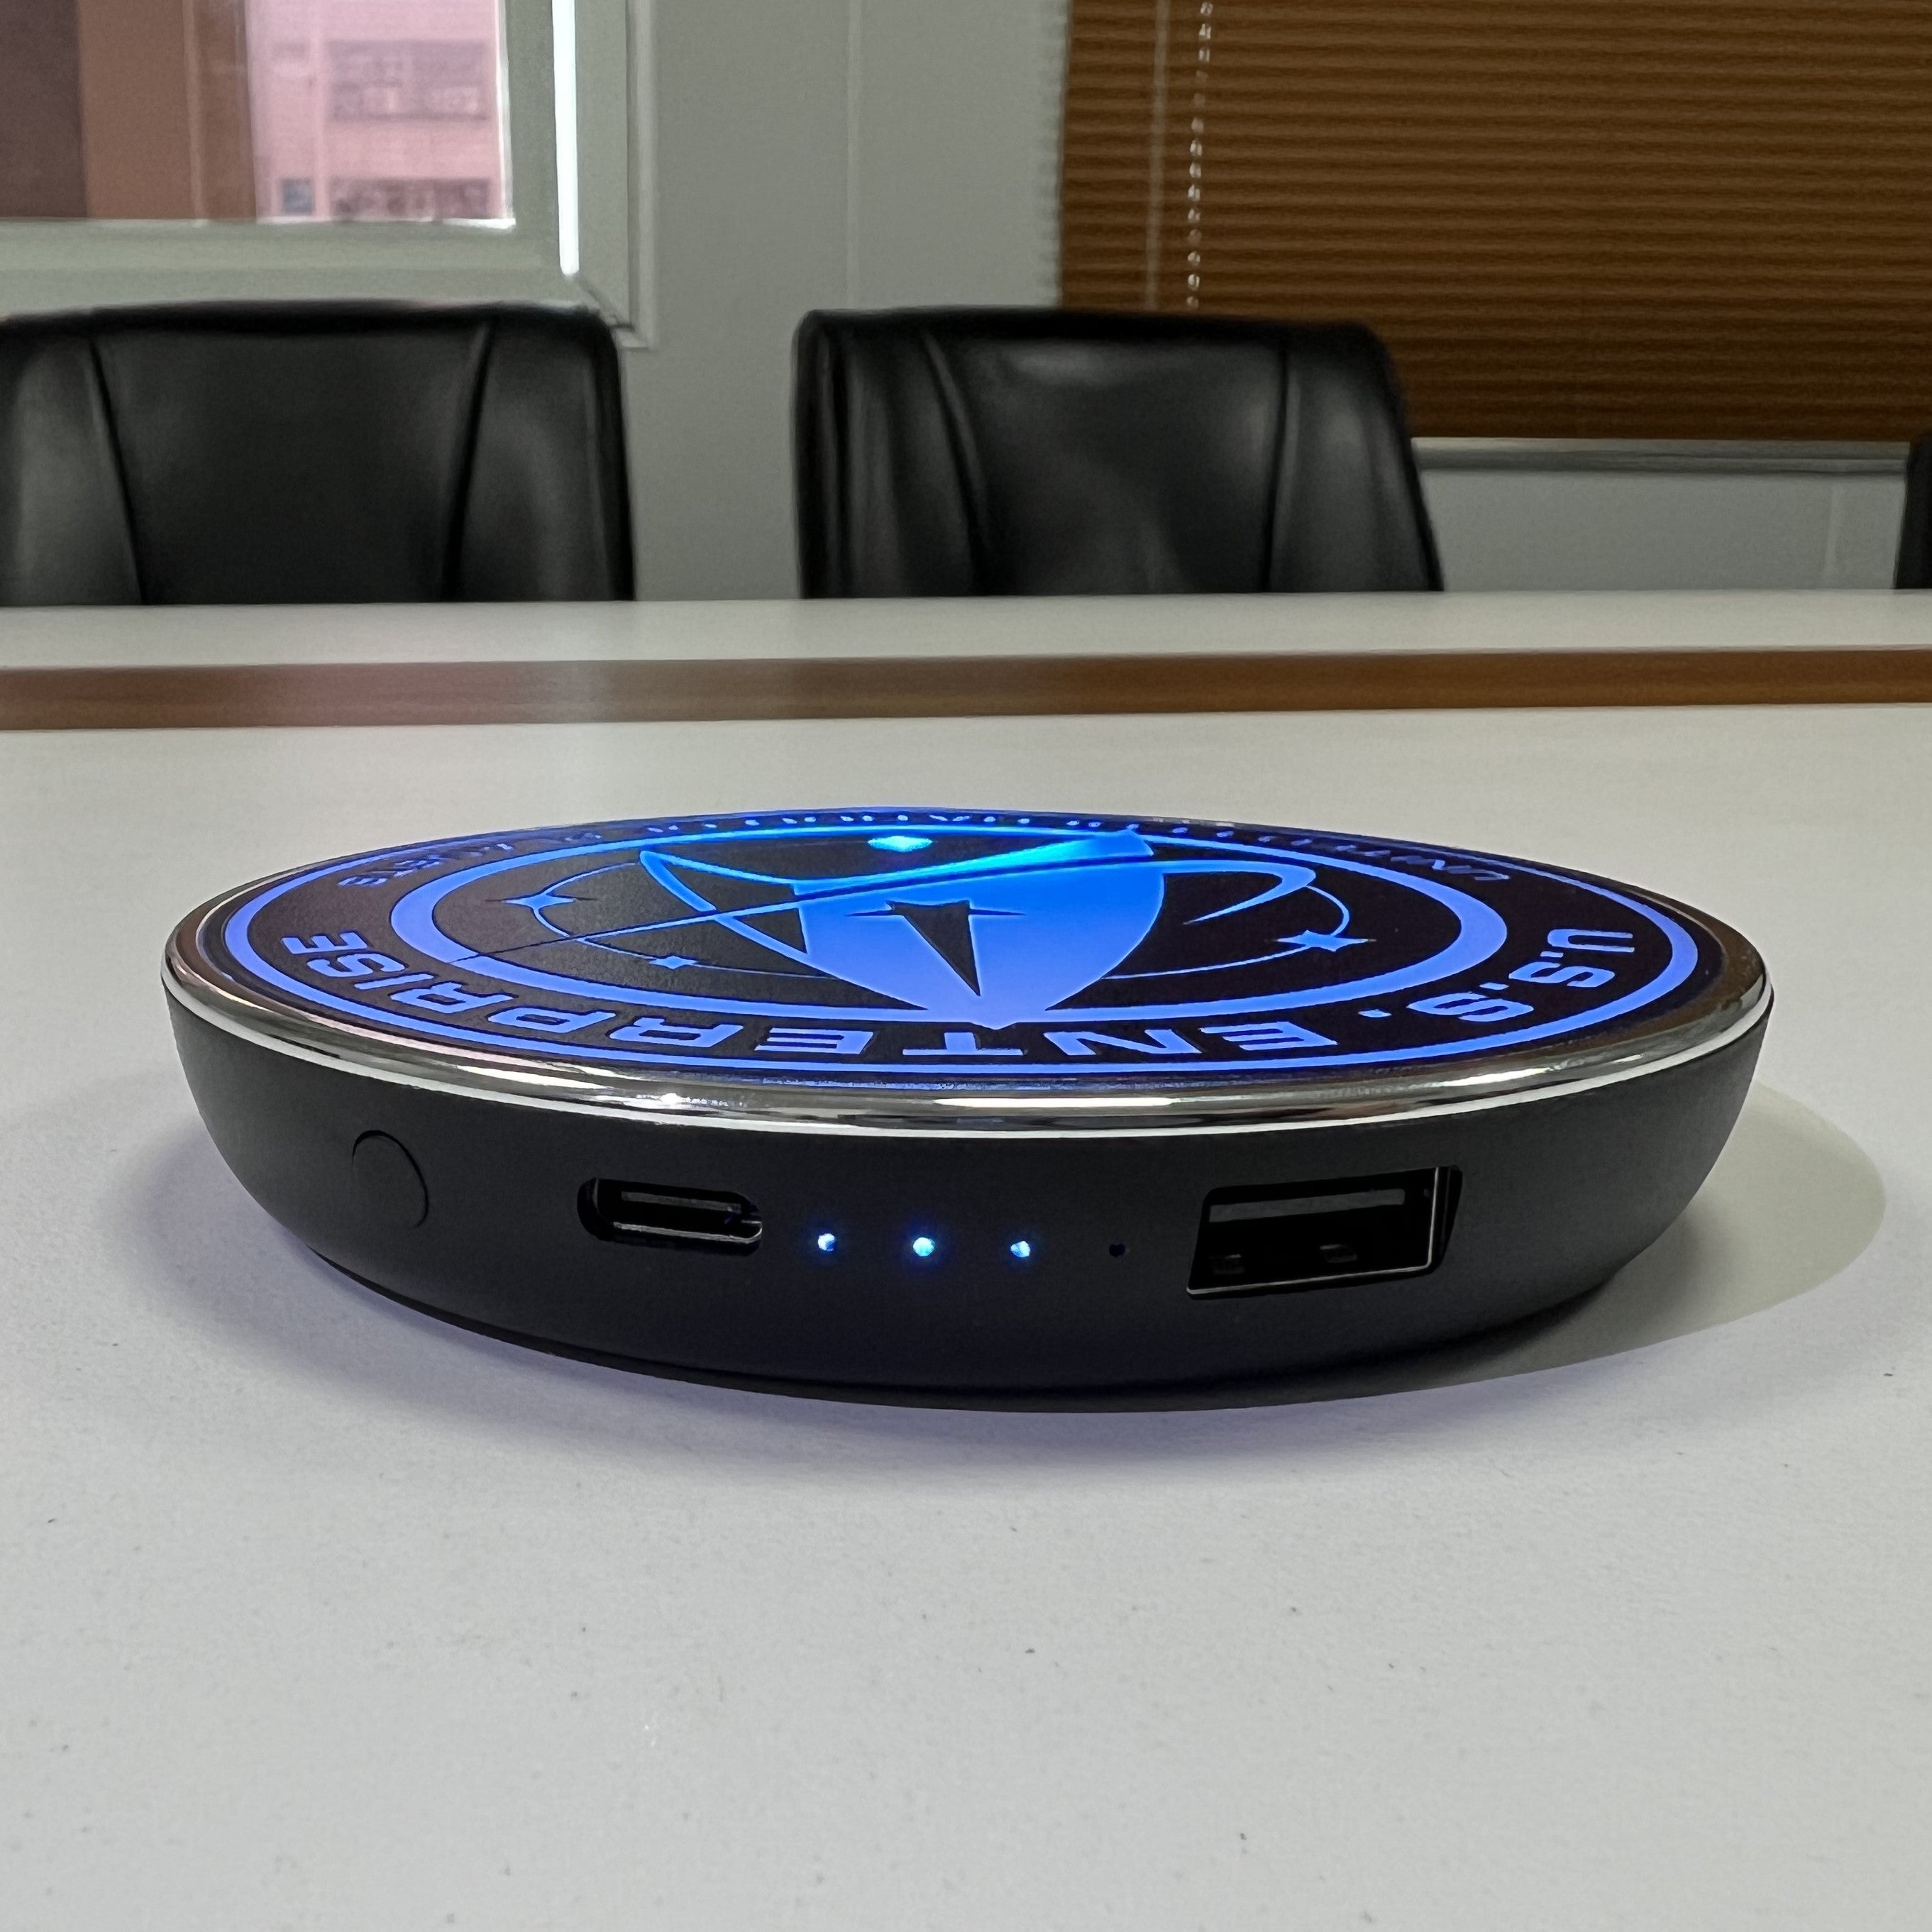 Star Trek Wireless Charger with Built-in Backup Battery Pack for Wired and  Wireless Charging. Portable Wireless Phone Charger with Enterprise Emblem